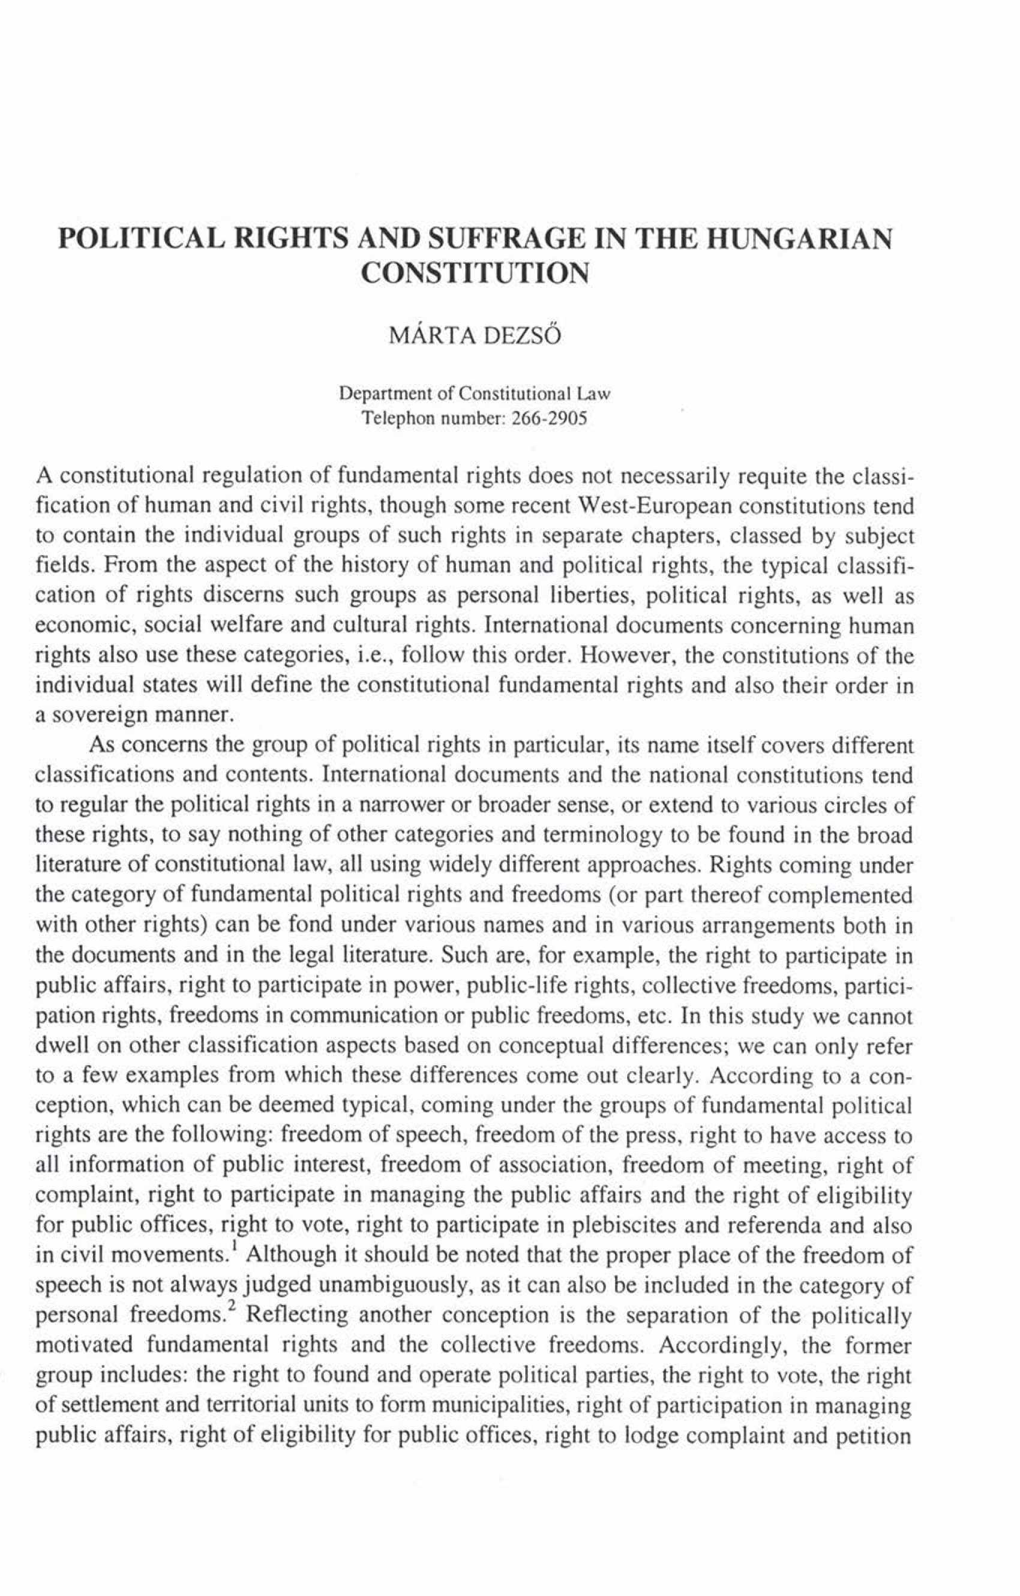 Political Rights and Suffrage in the Hungarian Constitution